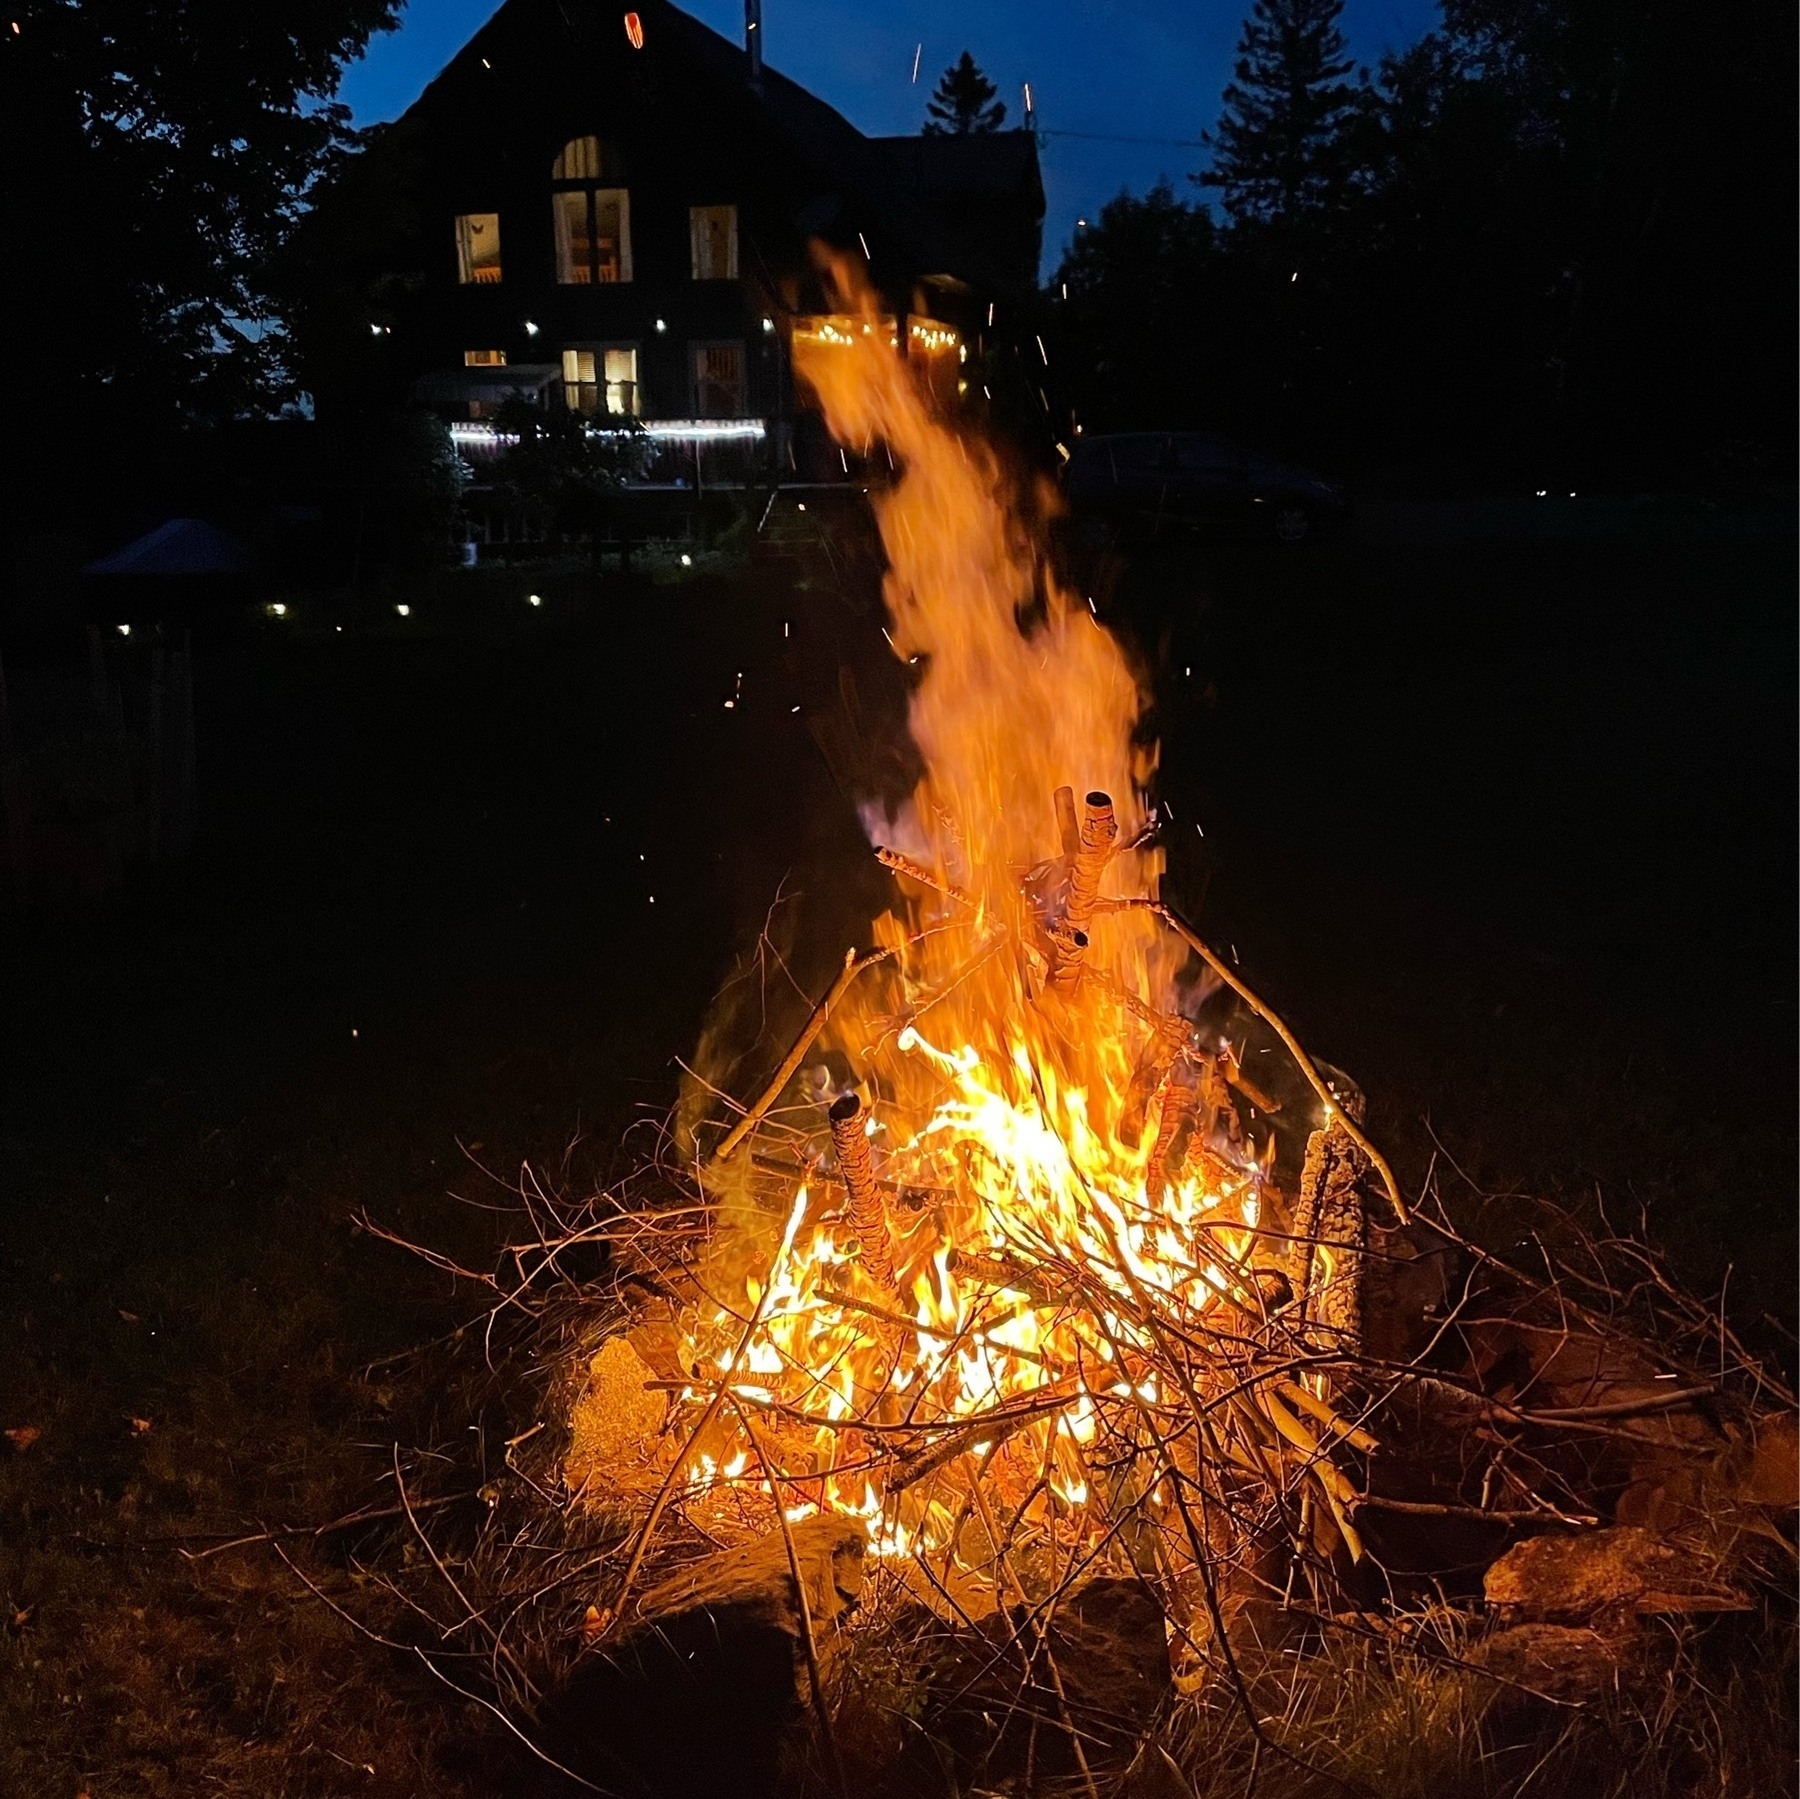 A large pile of sticks on fire in a fire pit at night with the flames rising up.